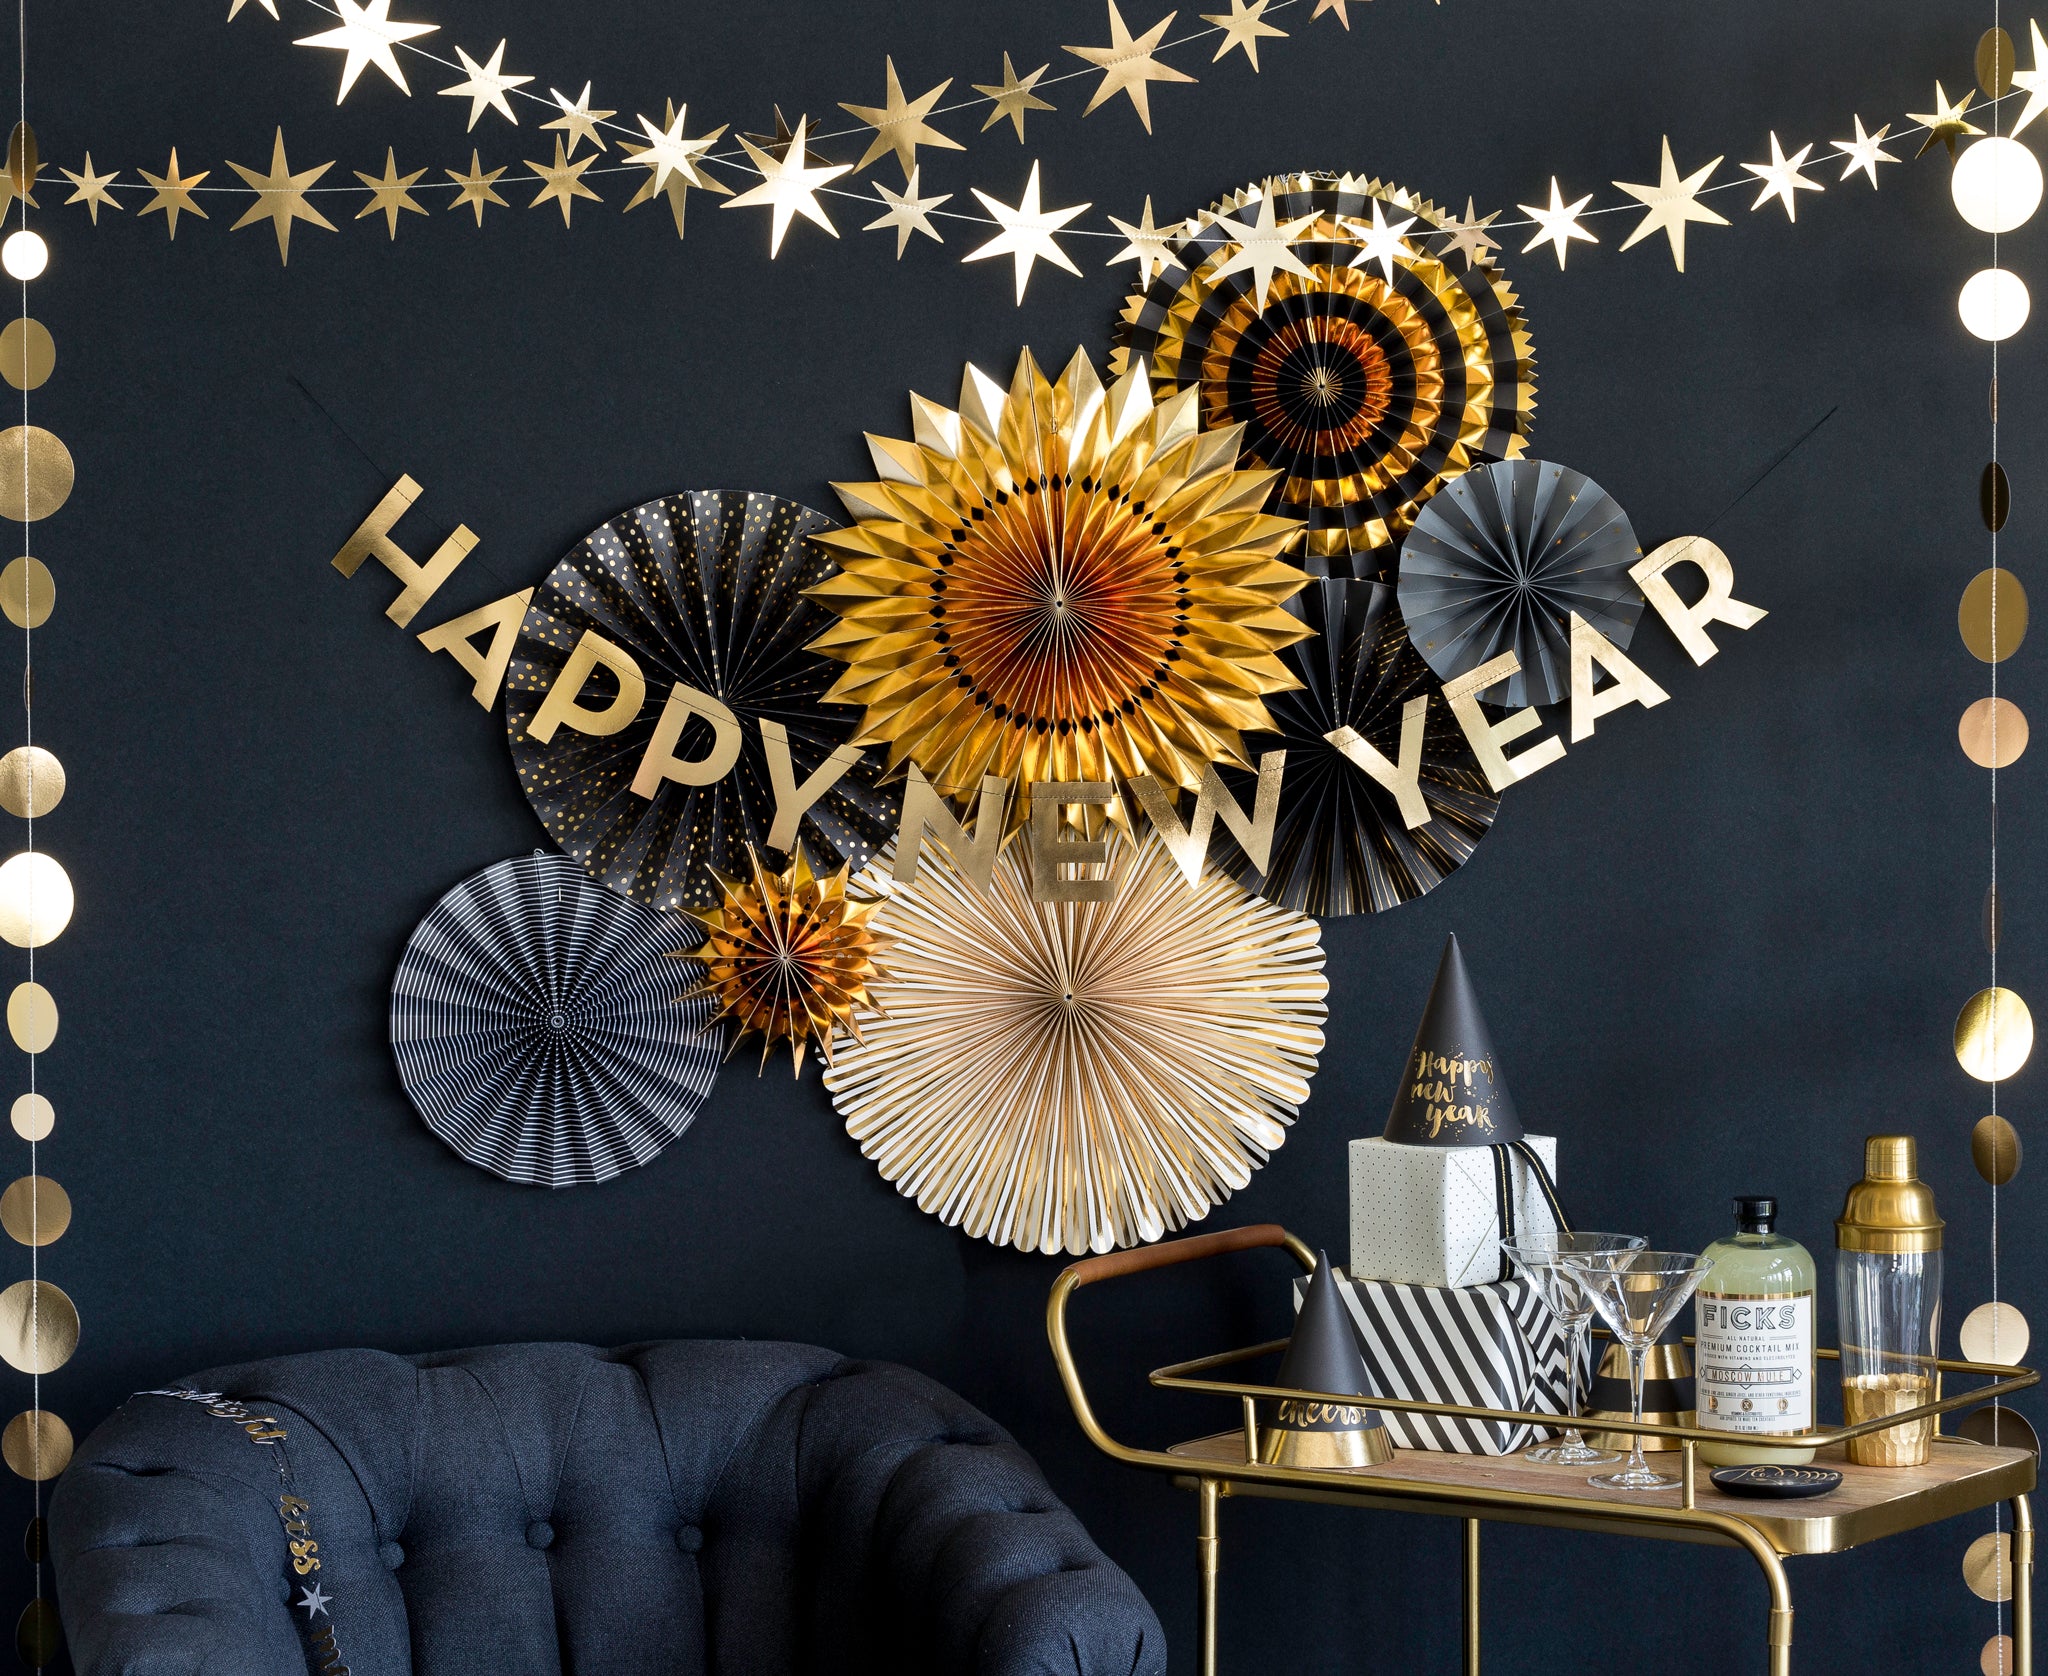 New Year's Eve Party Supplies, Tableware, and Decor | Oh So Fancy